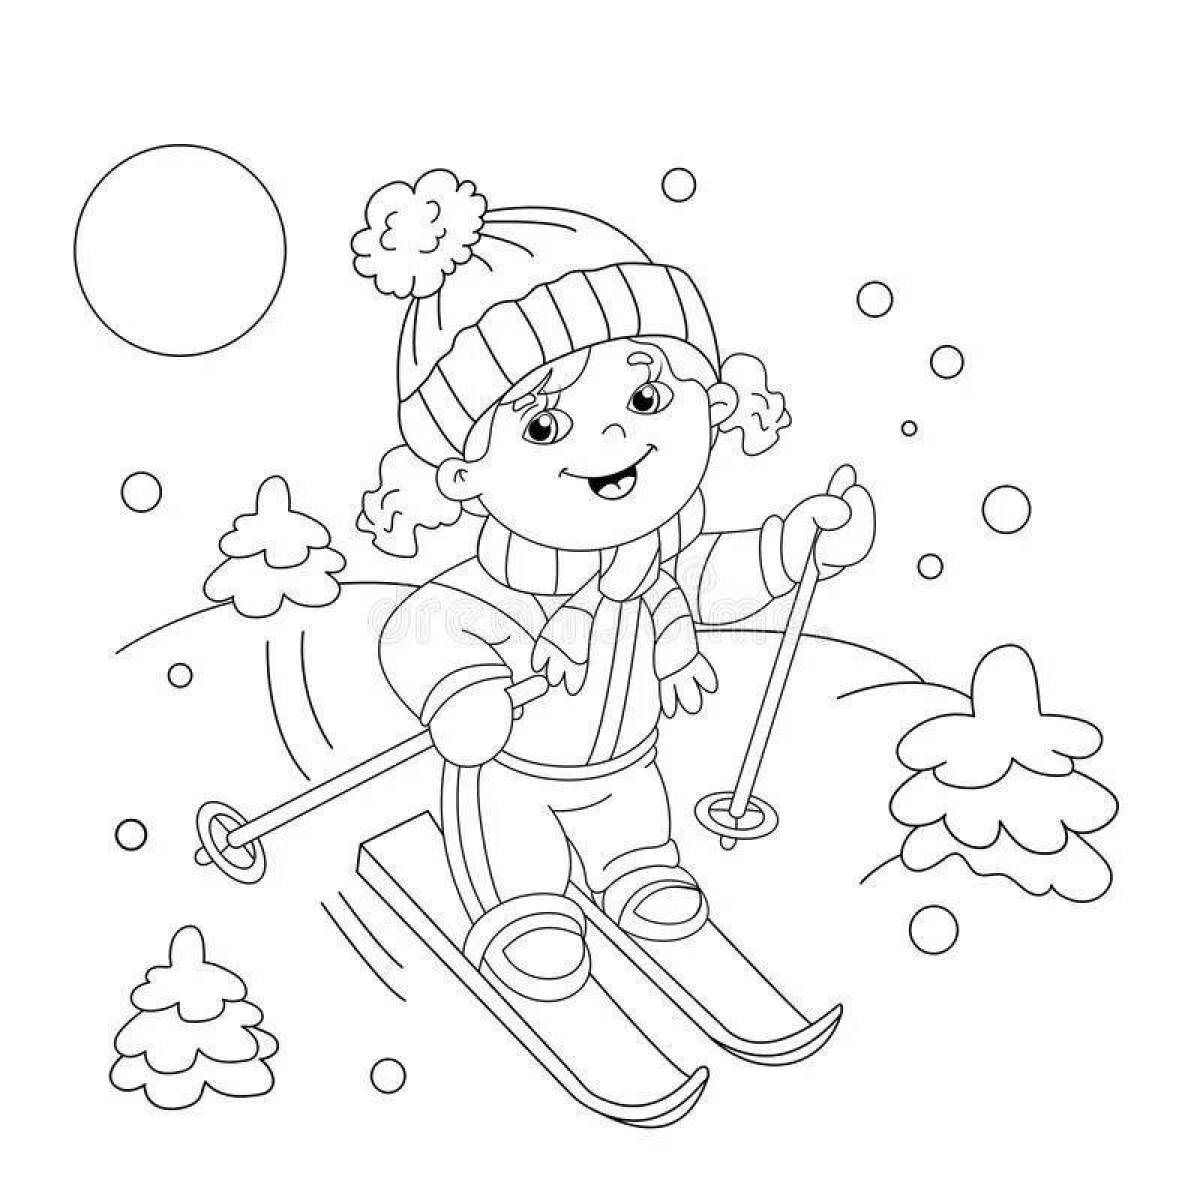 Joyful winter sports coloring pages for kids